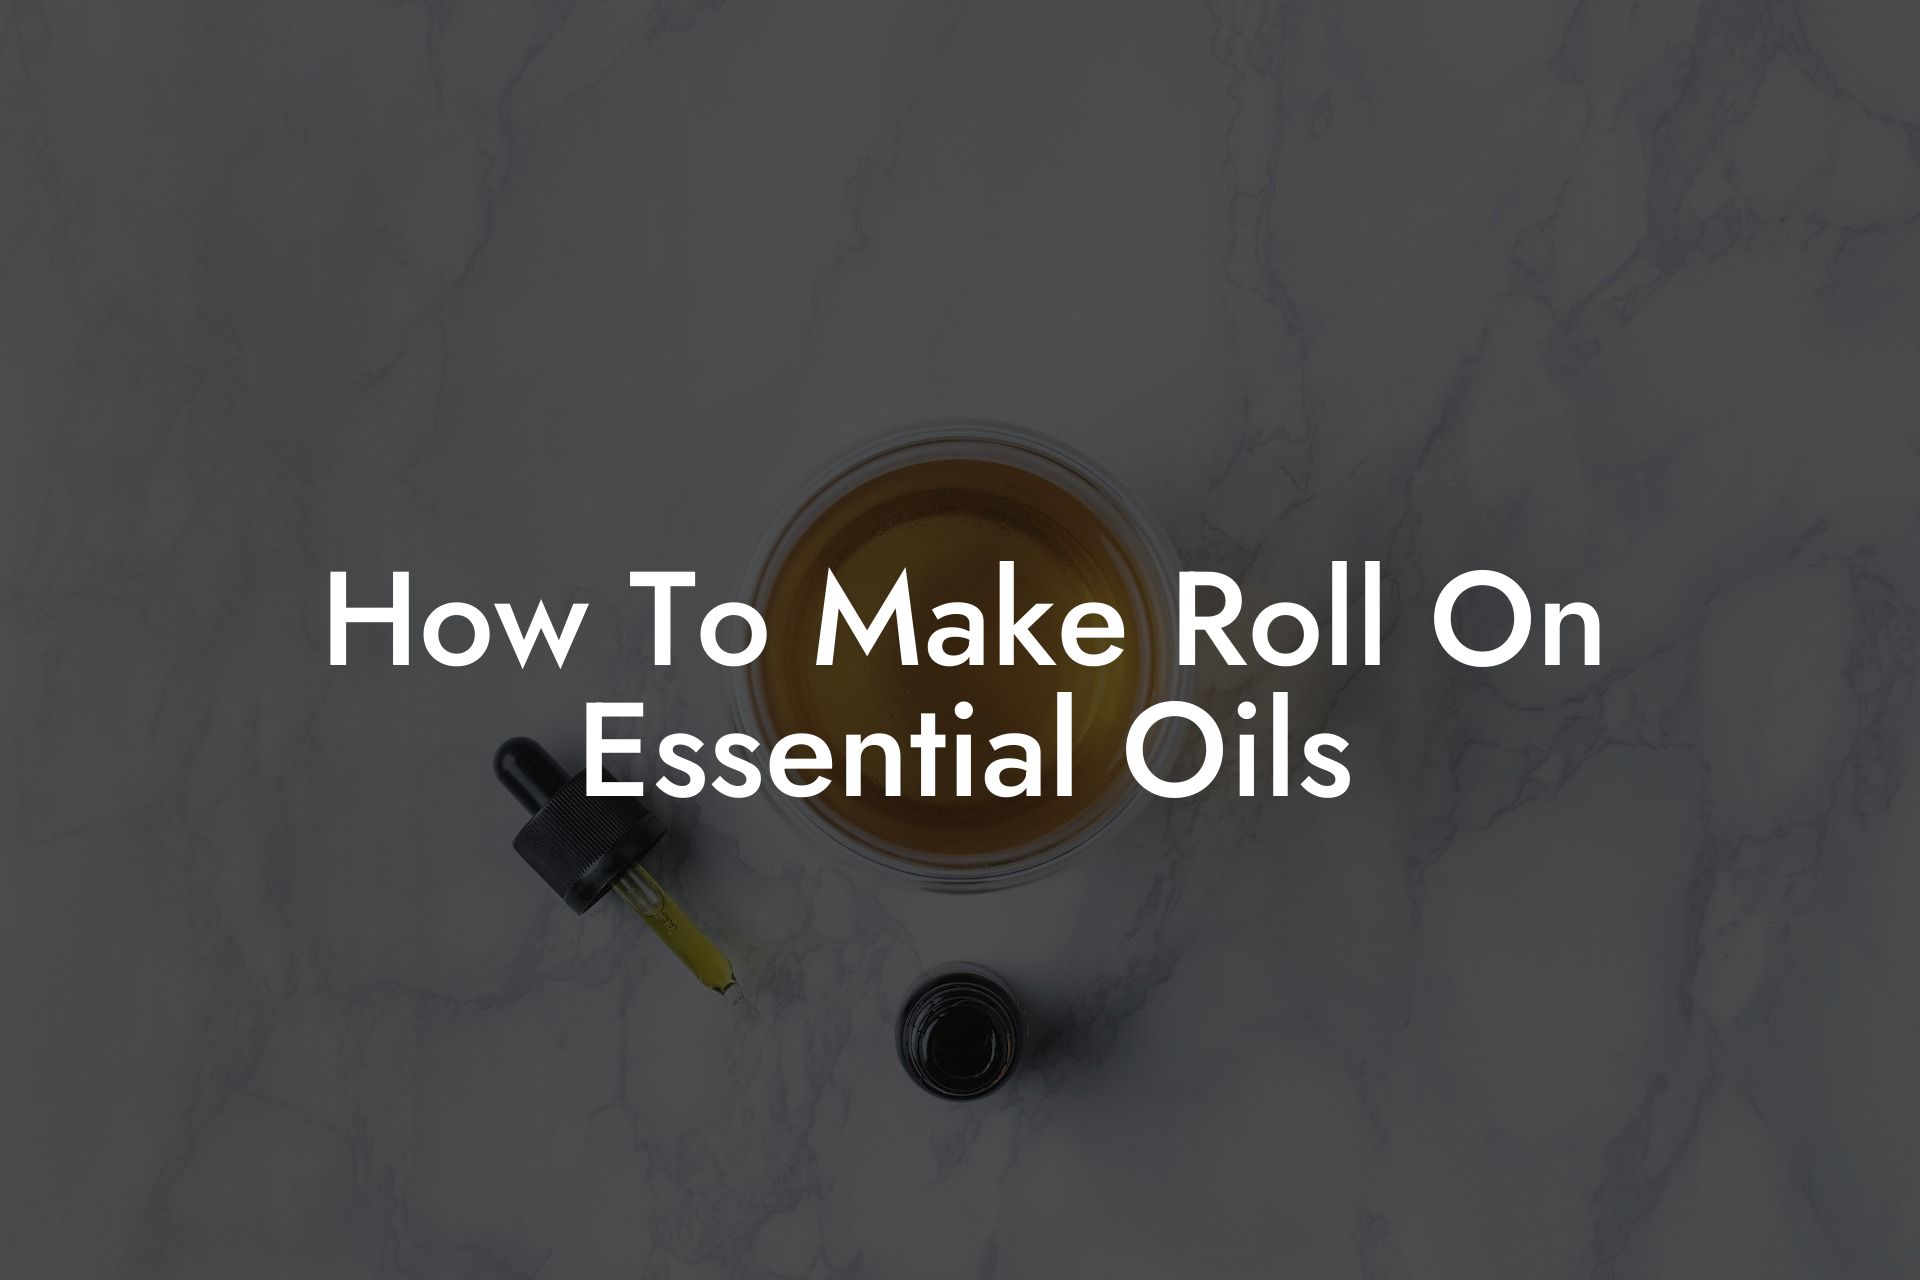 How To Make Roll On Essential Oils